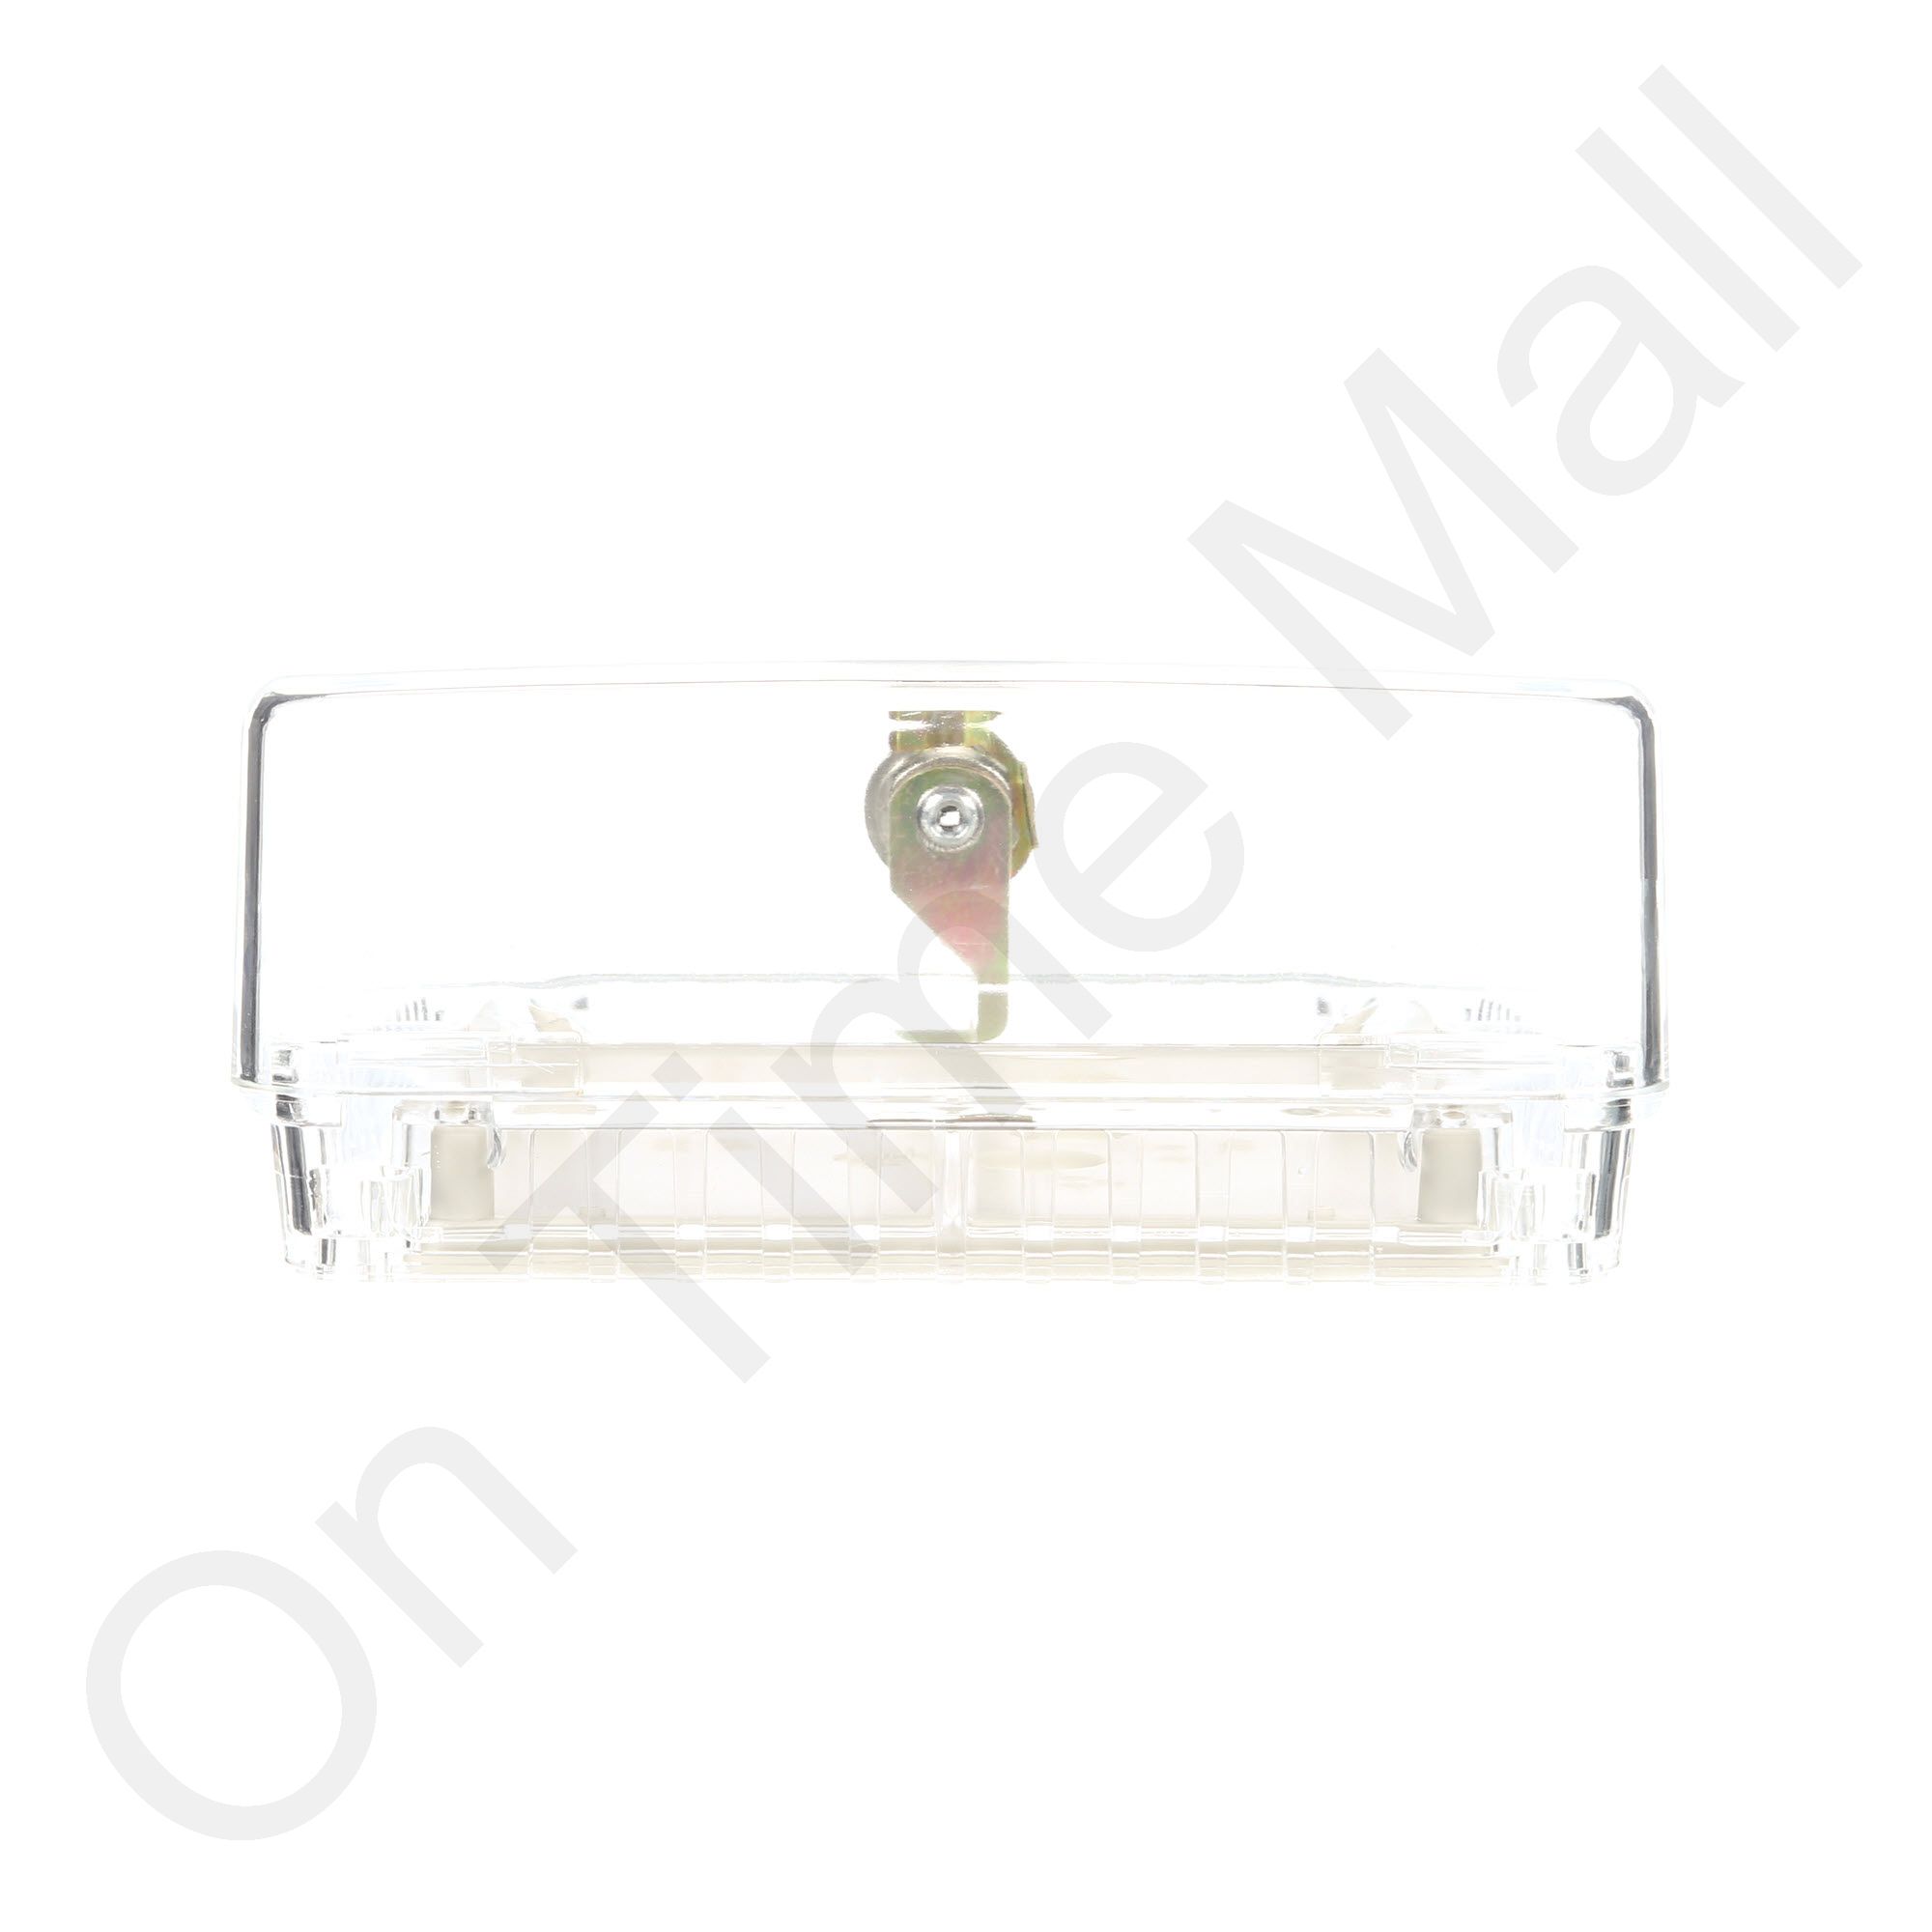 Honeywell TG510A1001 Small Thermostat Guard Cover